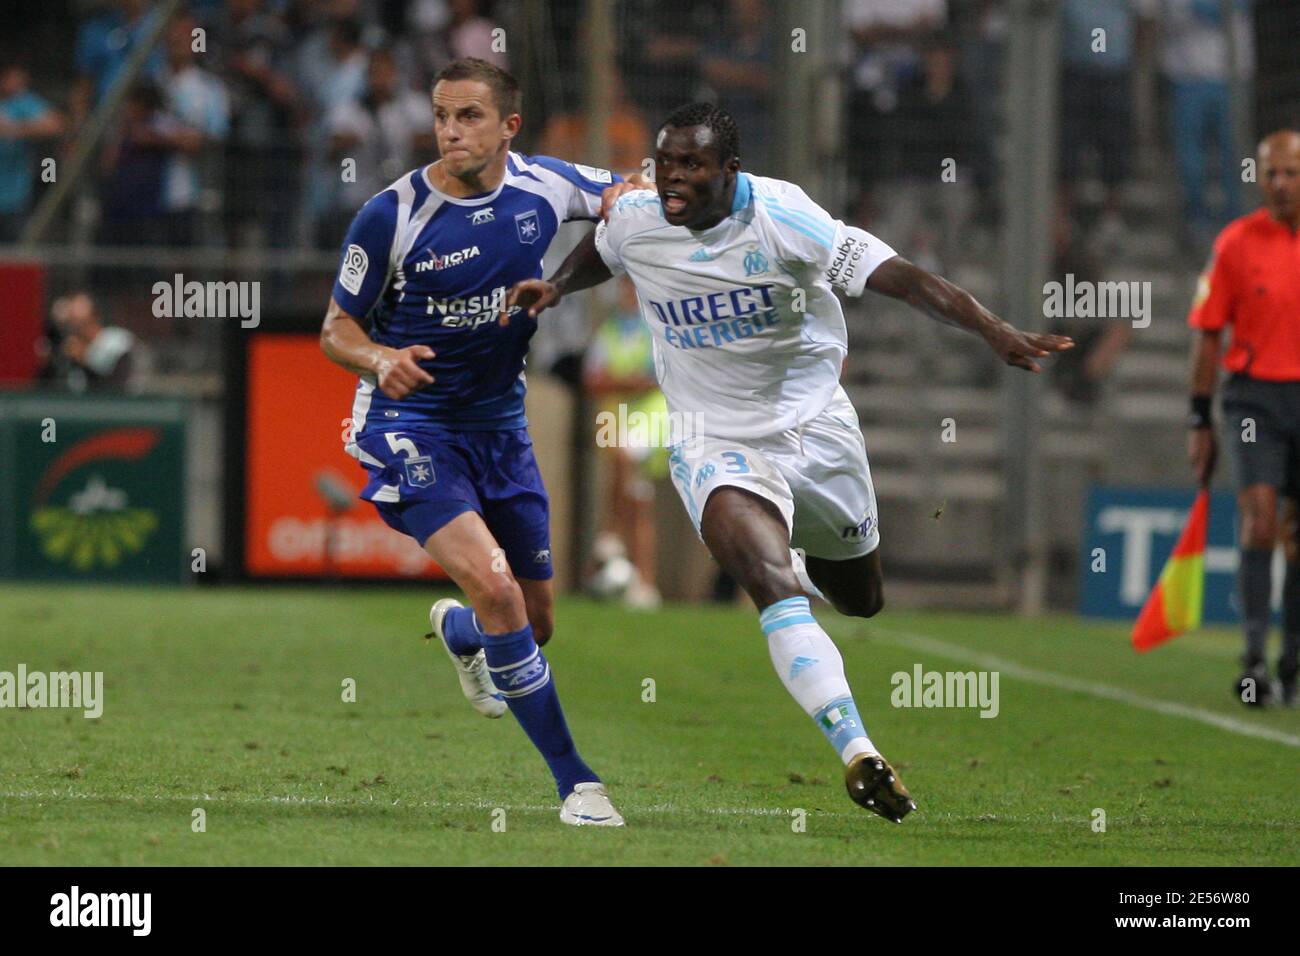 Auxerre's Dariusz Dudka during the match against Marseille in Marseille, France on August 17, 2008 at the Stade Velodrome. Marseille won 4-0. Photo by Stuart Morton/Cameleon/ABACAPRESS.COM Stock Photo